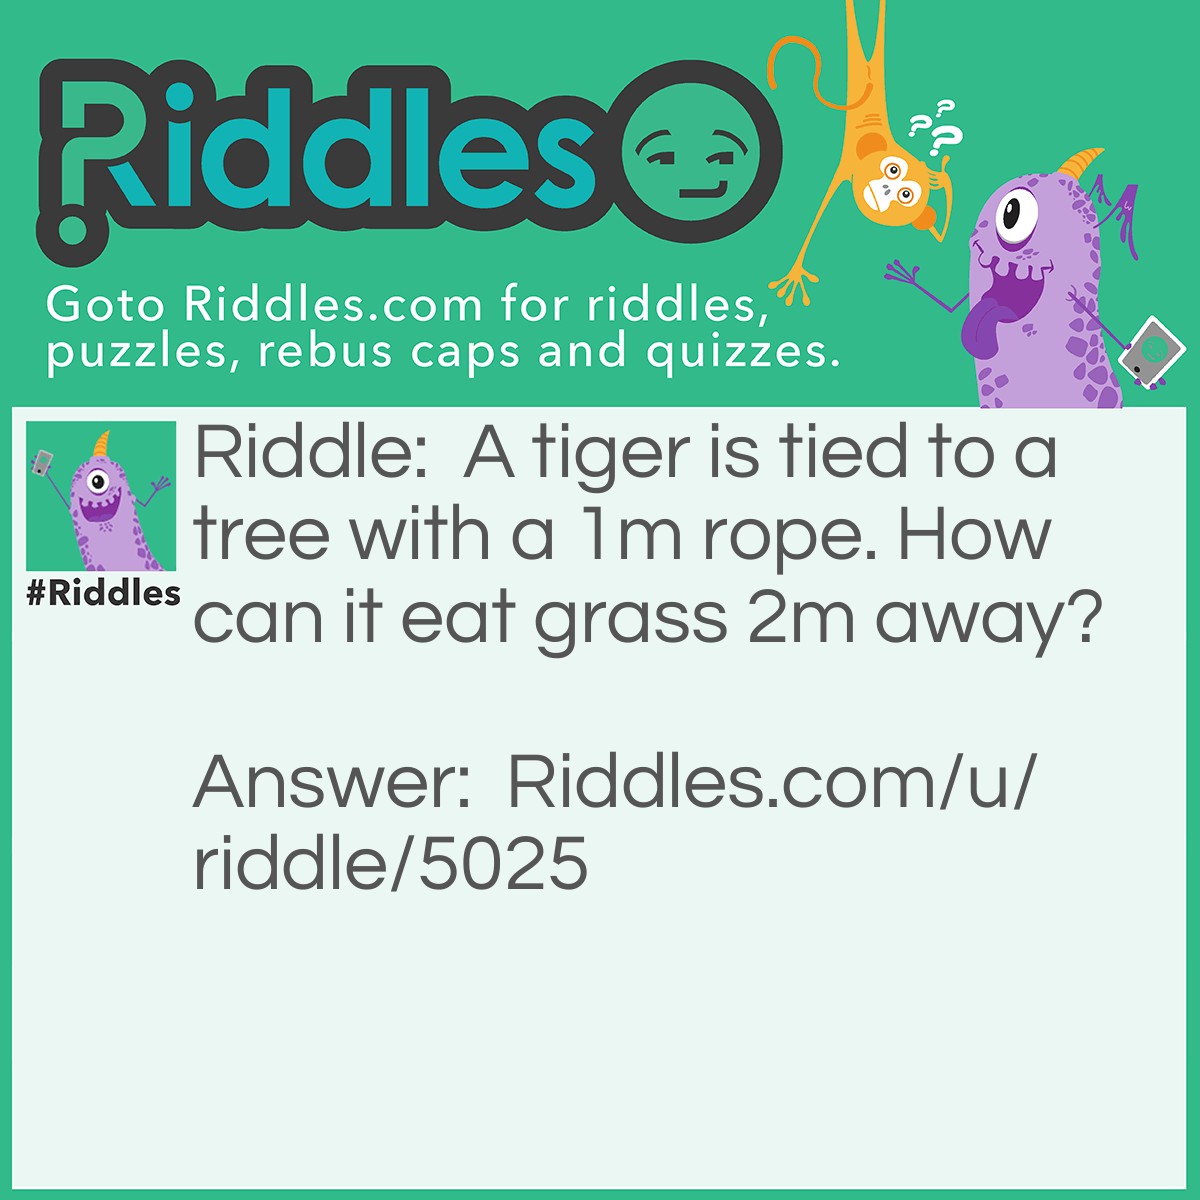 Riddle: A tiger is tied to a tree with a 1m rope. How can it eat grass 2m away? Answer: Tigers don't eat grass.